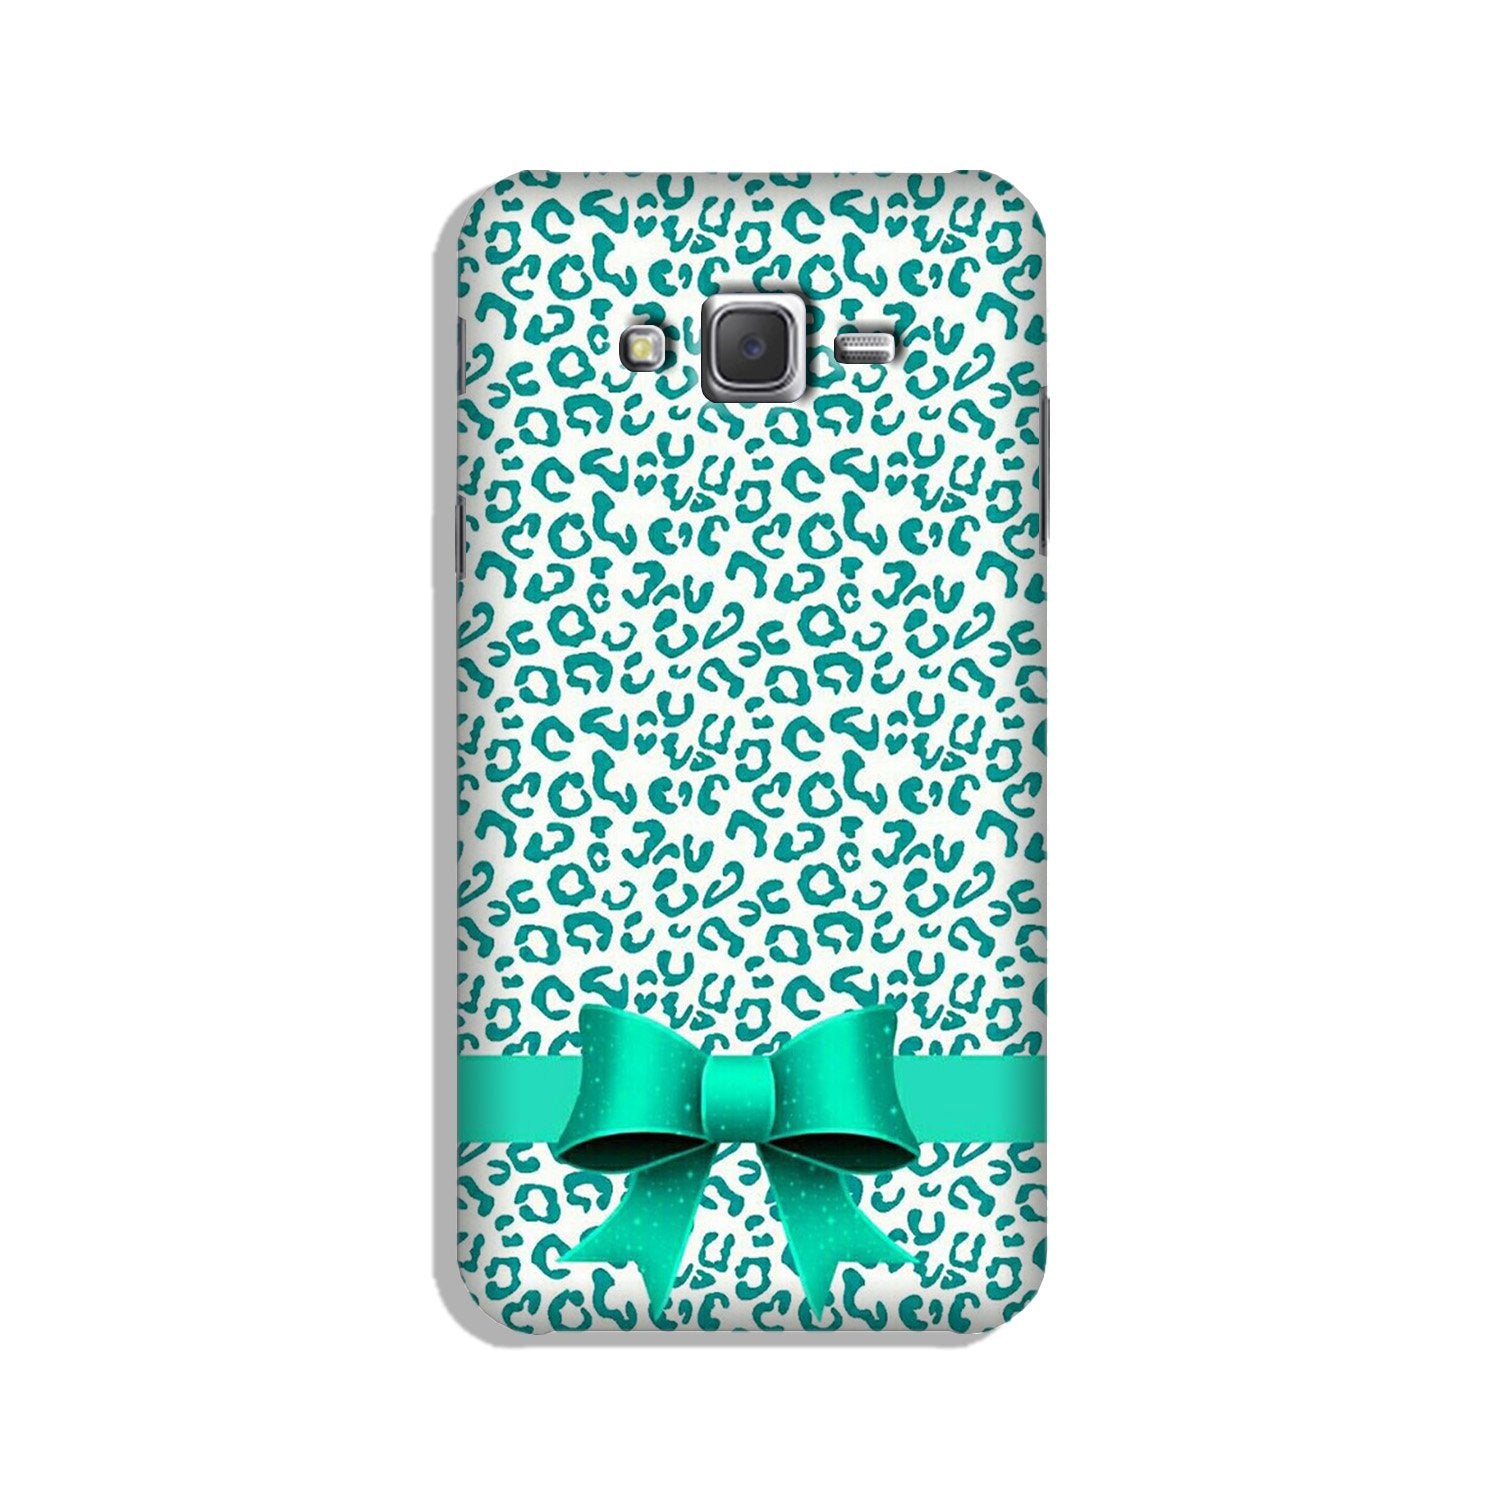 Gift Wrap6 Case for Galaxy J5 (2015)